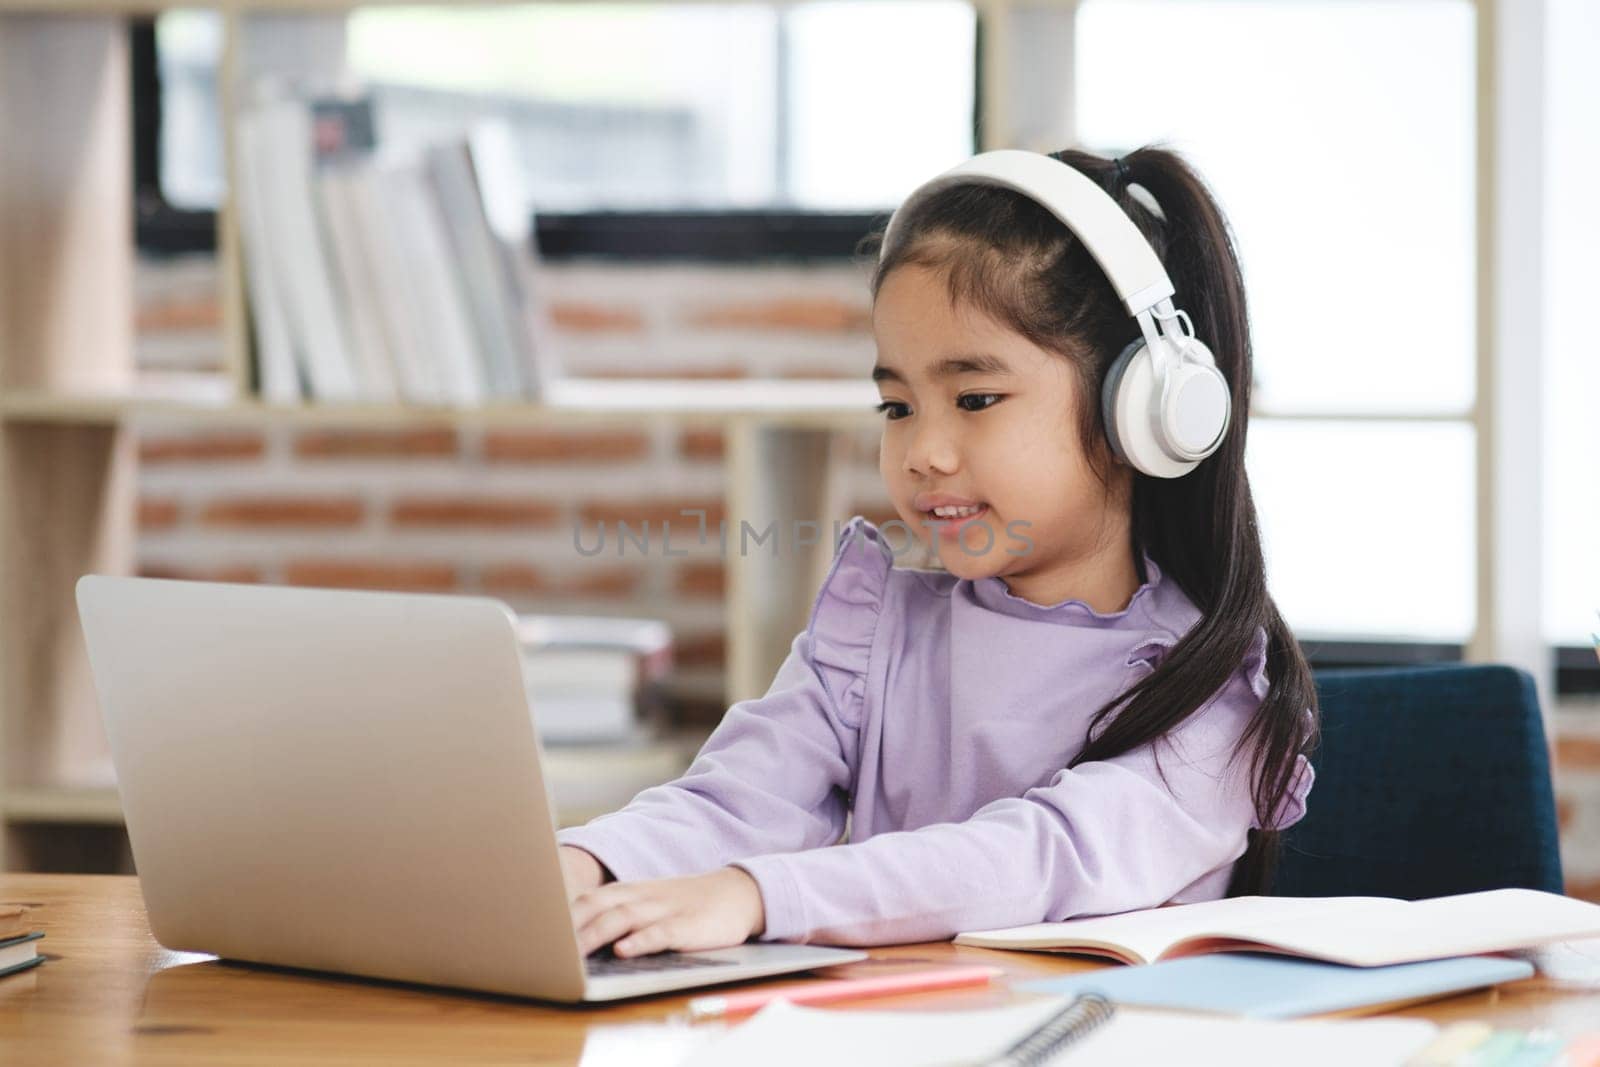 A young girl is sitting at a desk with a laptop and headphones on. She is smiling and she is enjoying her work